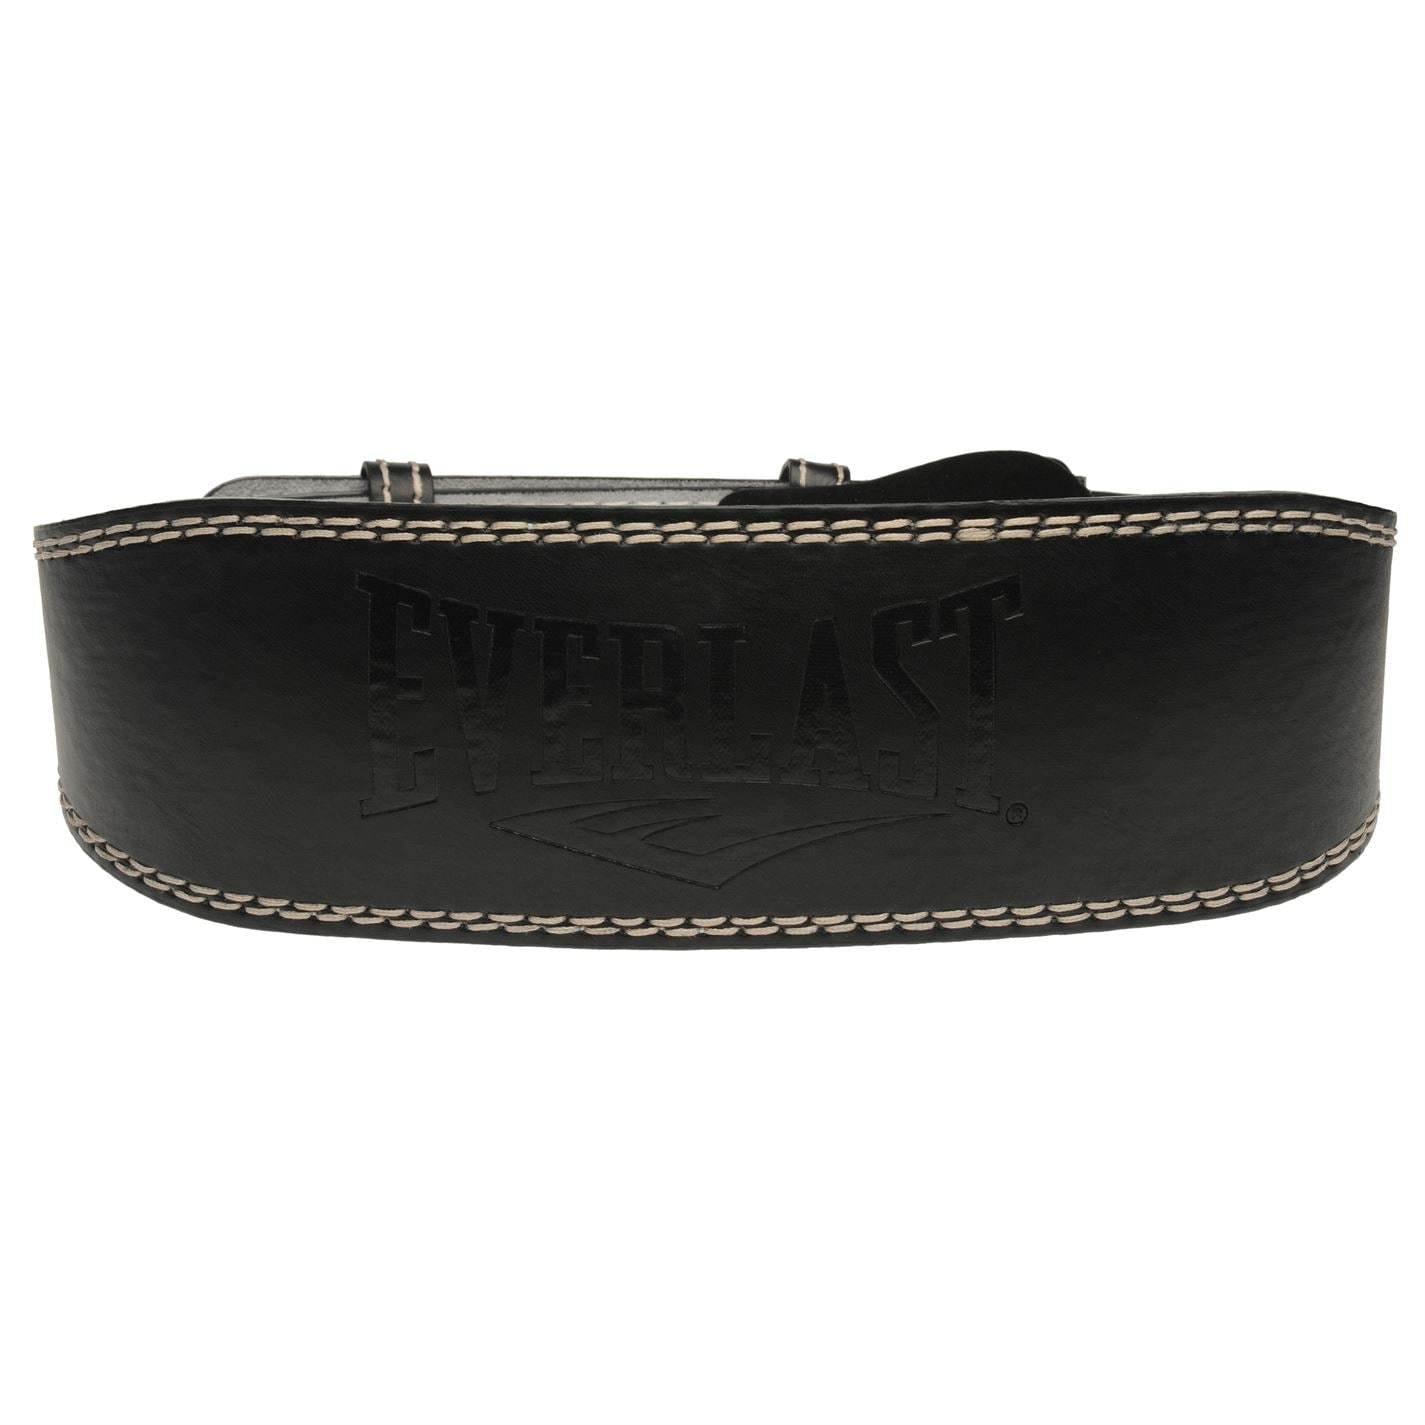 Everlast Leather Weight Lifting Belt with Padded Back Lining - Best Price online Prokicksports.com